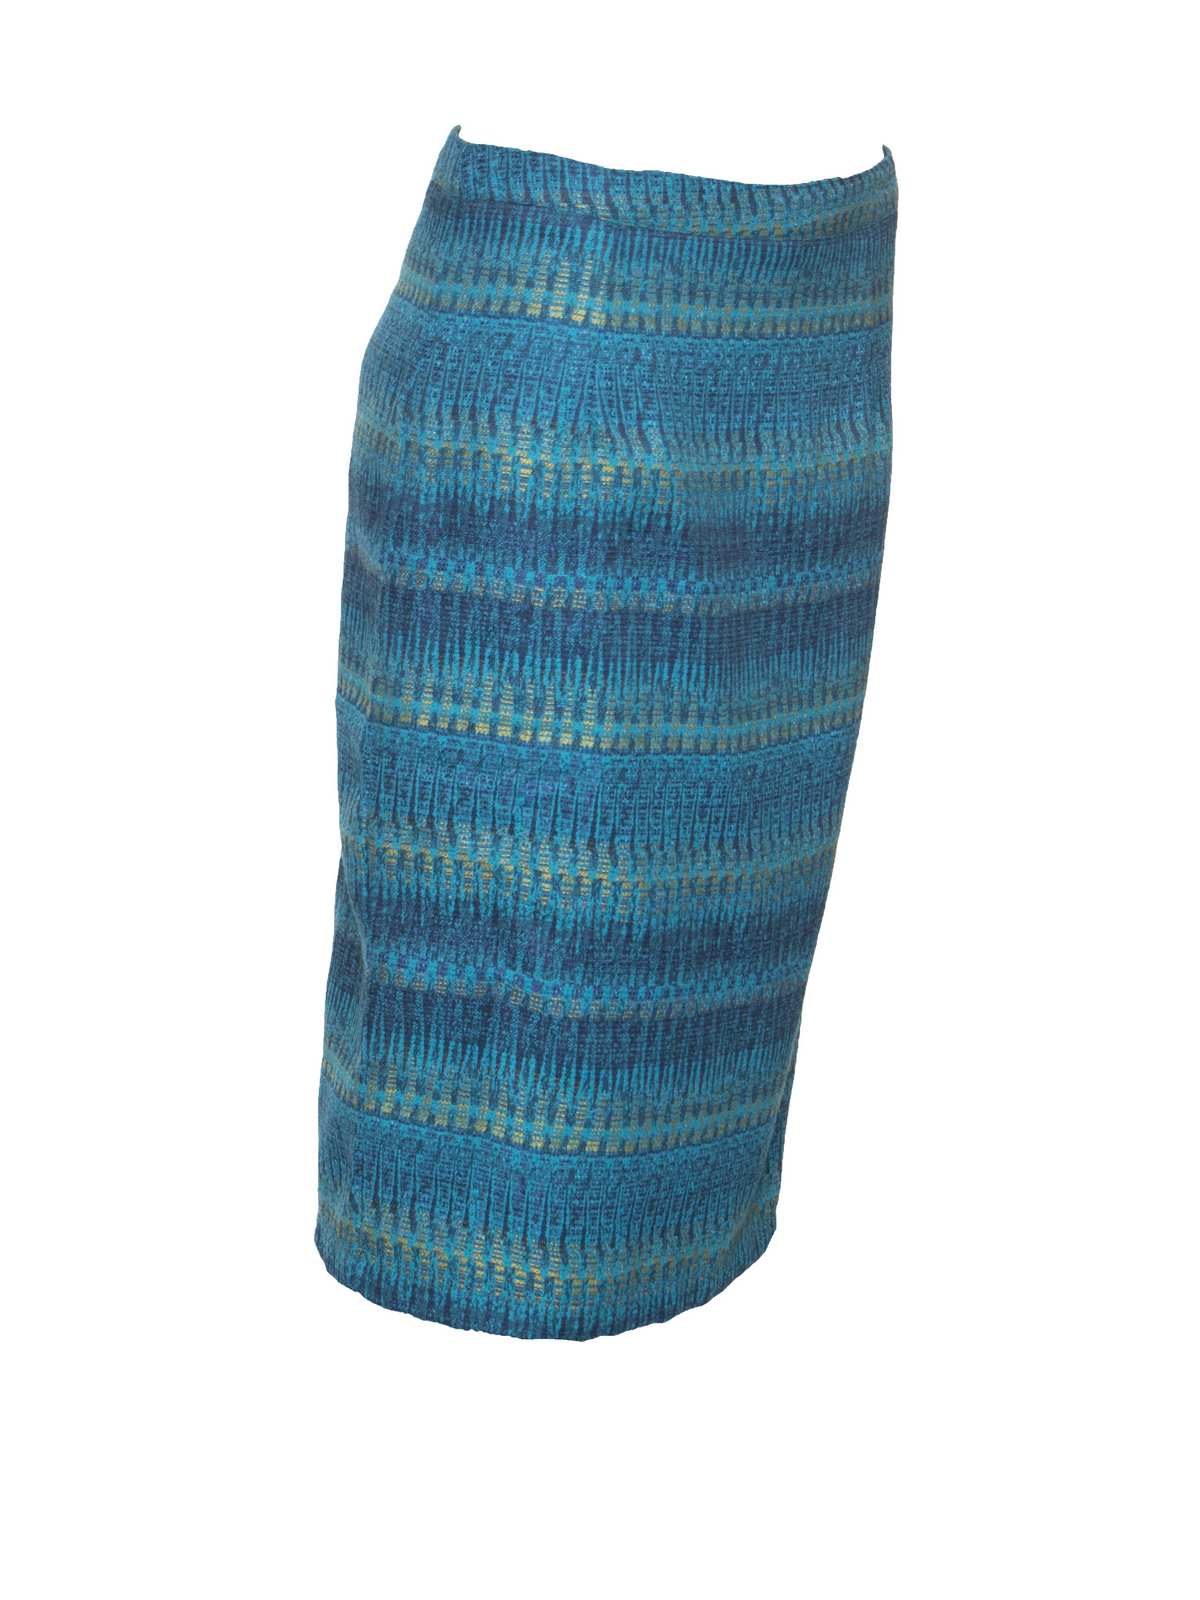 Lily and Me Woven Jacquard Pencil Skirt Blue